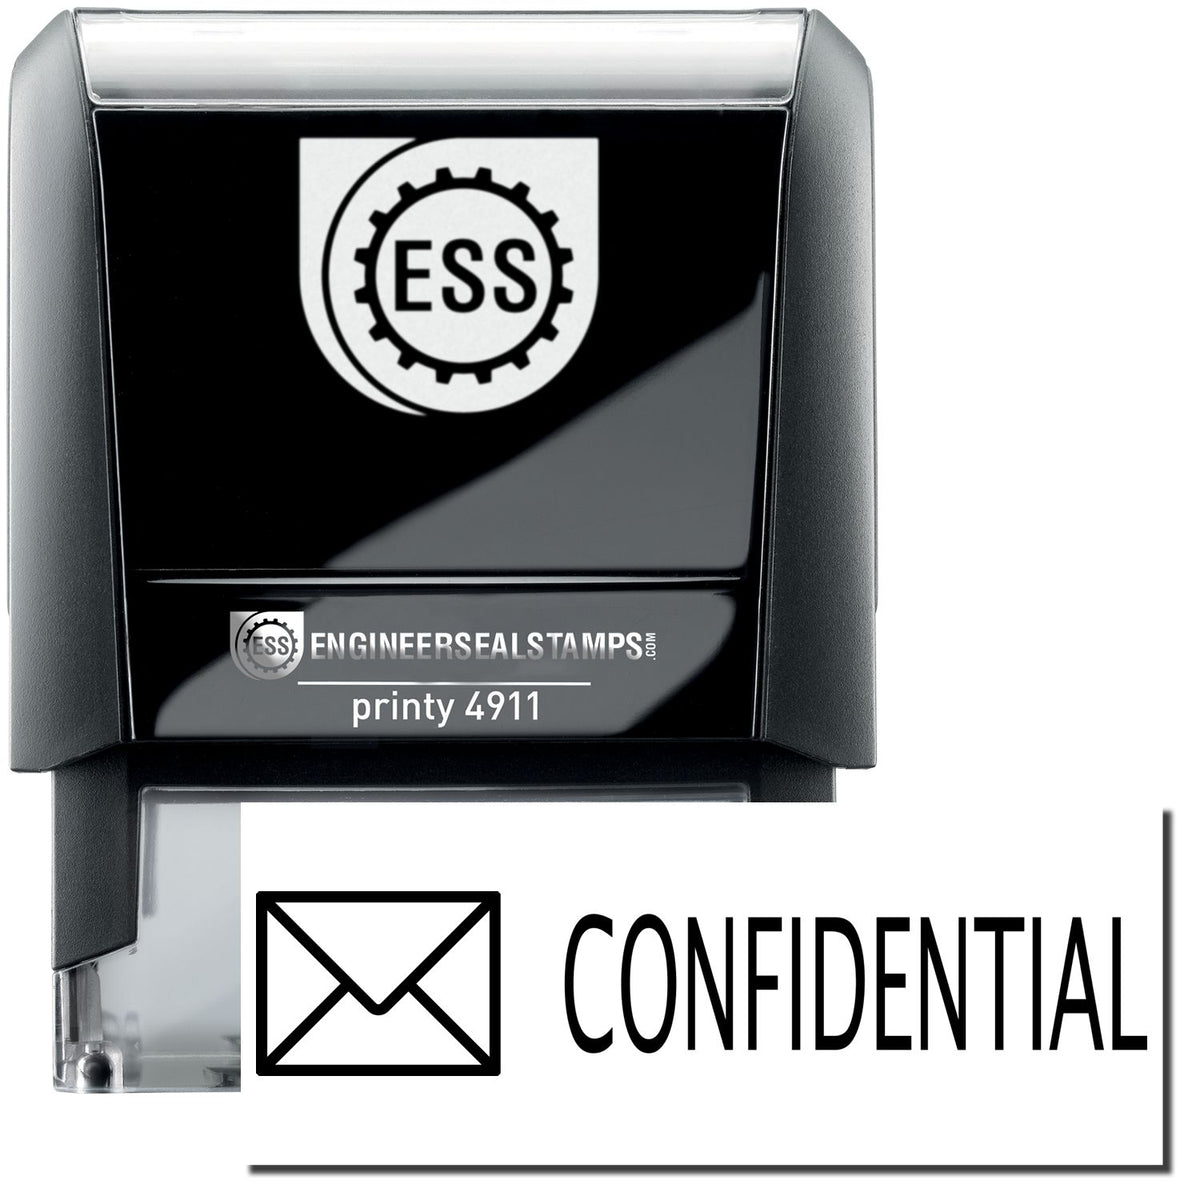 A self-inking stamp with a stamped image showing how the text &quot;CONFIDENTIAL&quot; with an envelope icon on the left is displayed after stamping.